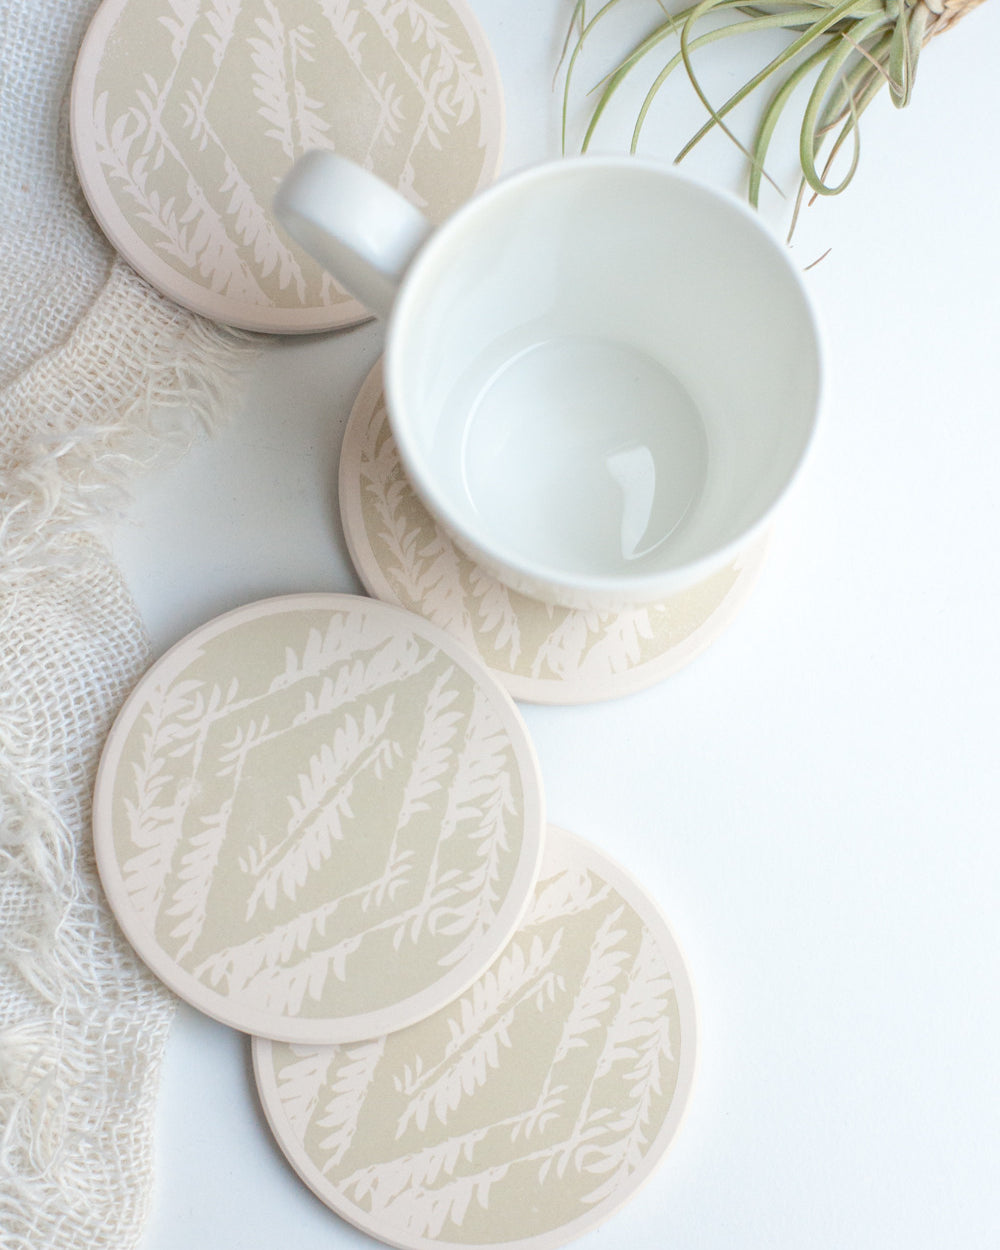 Ceramic Coasters, Pale Sage Feathers - Gather Goods Co - Raleigh, NC